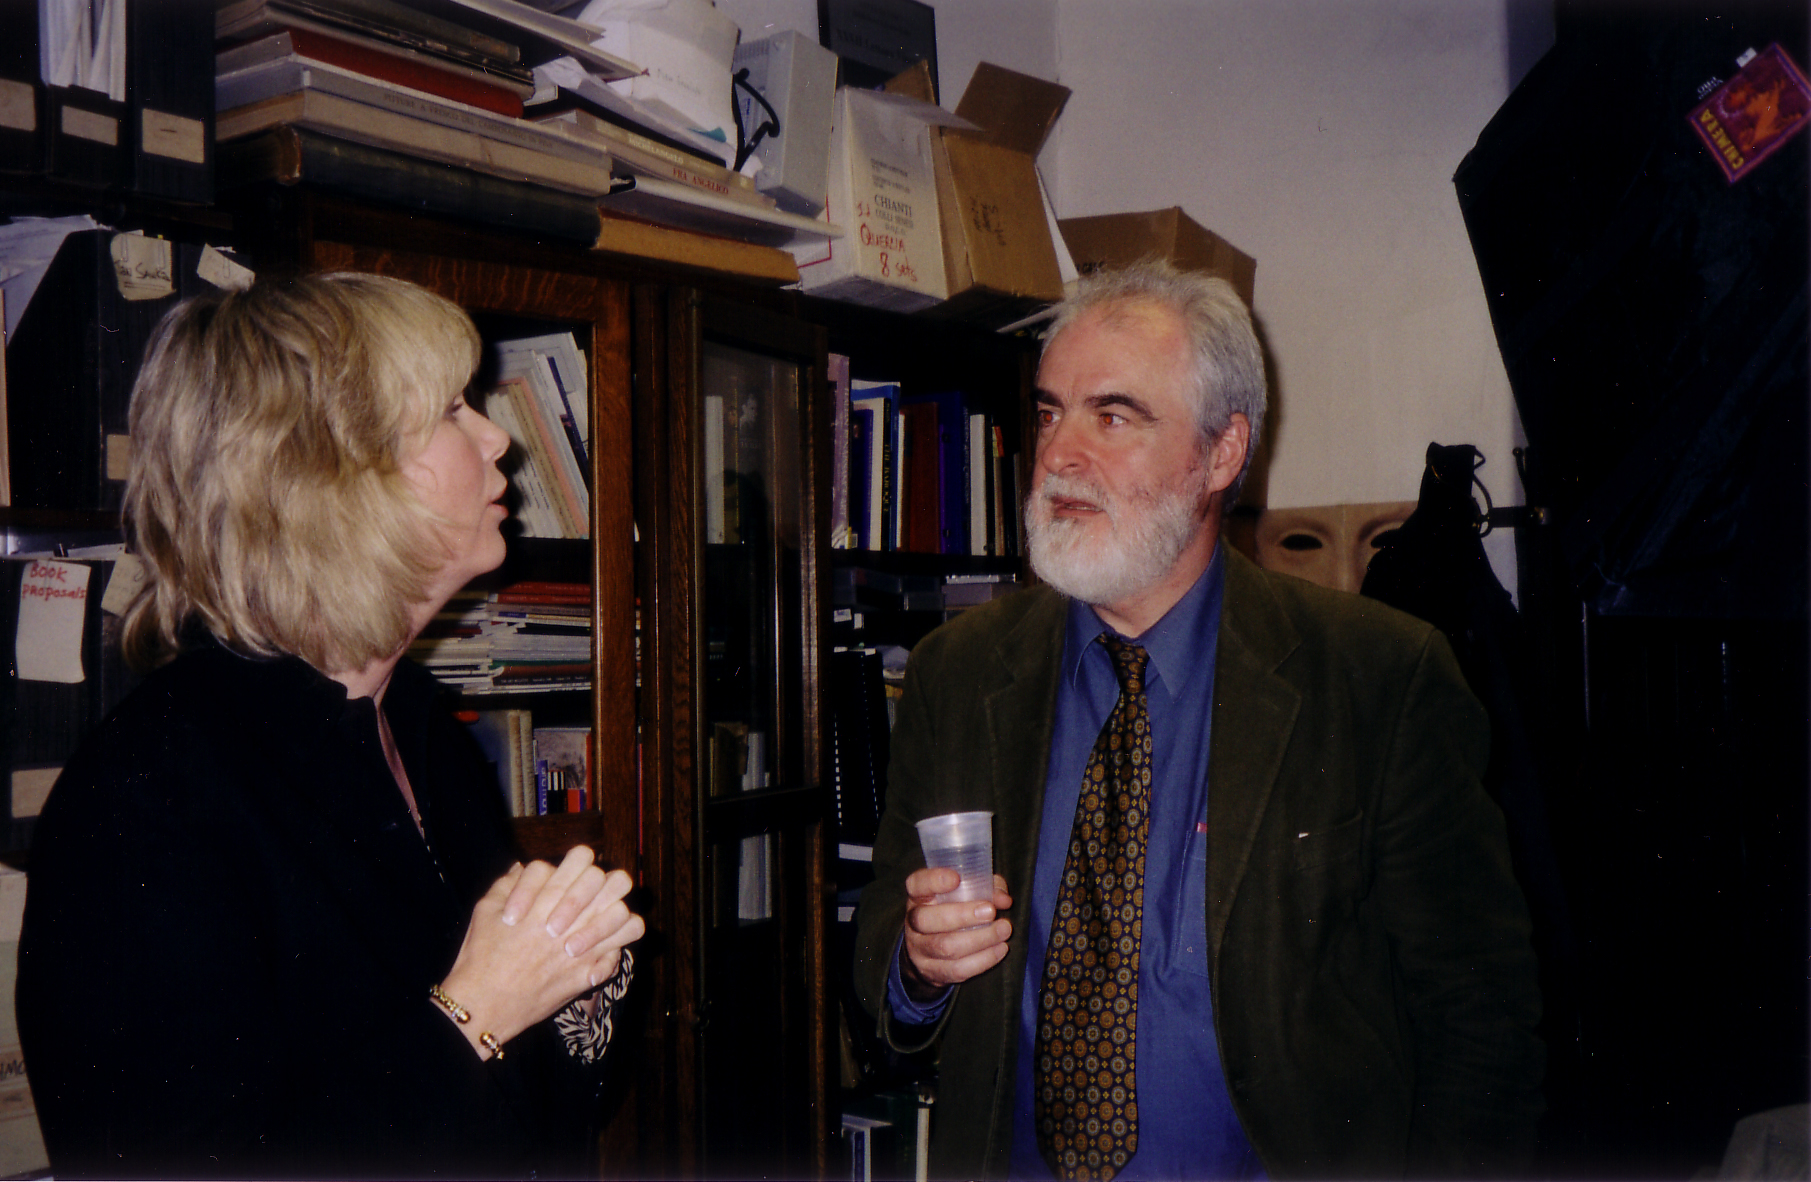 Dore Hammond interviewing Michael Daley of ArtWatch UK for documentray Divine Light: A Frank Mason Perspective. The interview took place at Columbia University office of Professor James Beck. Professor Beck was the Chair Emeritus of Arts and Archelogy Department at Columbia University.